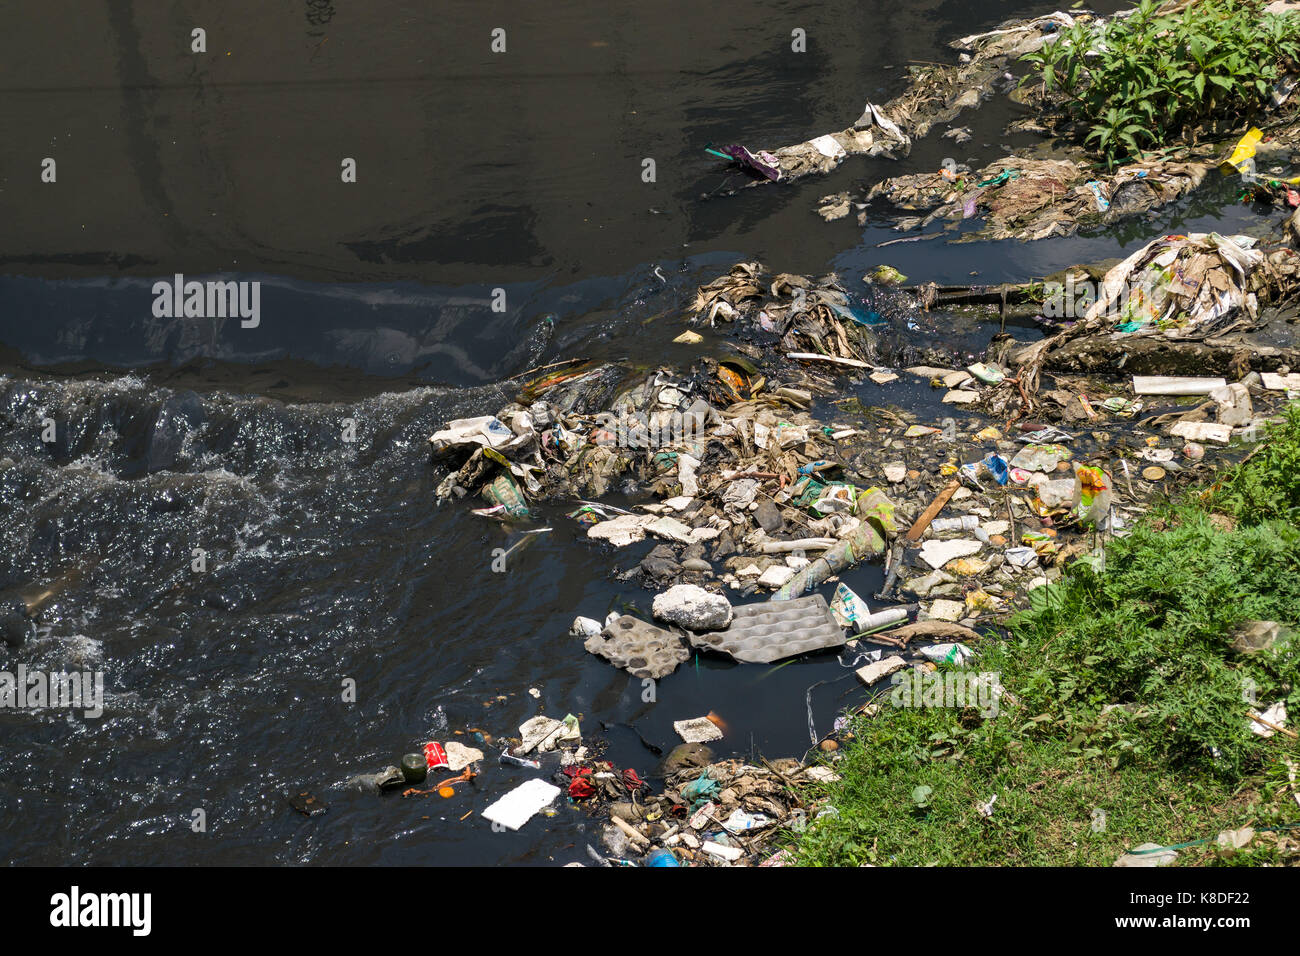 The Ngong river which is polluted with rubbish, plastic waste and garbage, Nairobi, Kenya Stock Photo